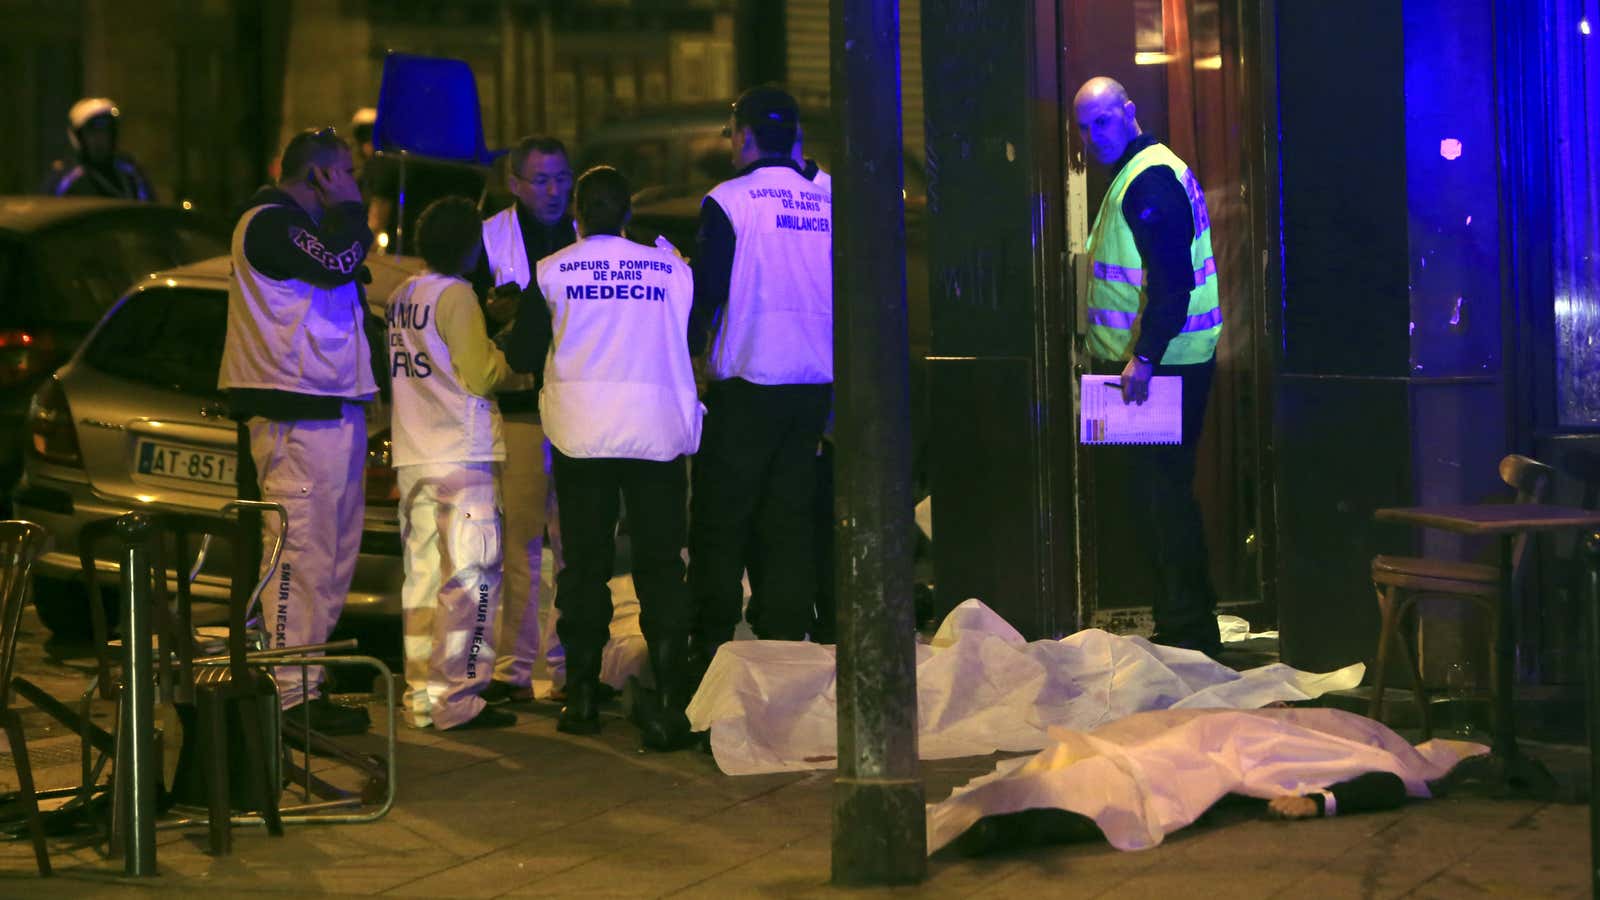 Medical staff stand by victims in a Paris restaurant, Friday, Nov. 13.